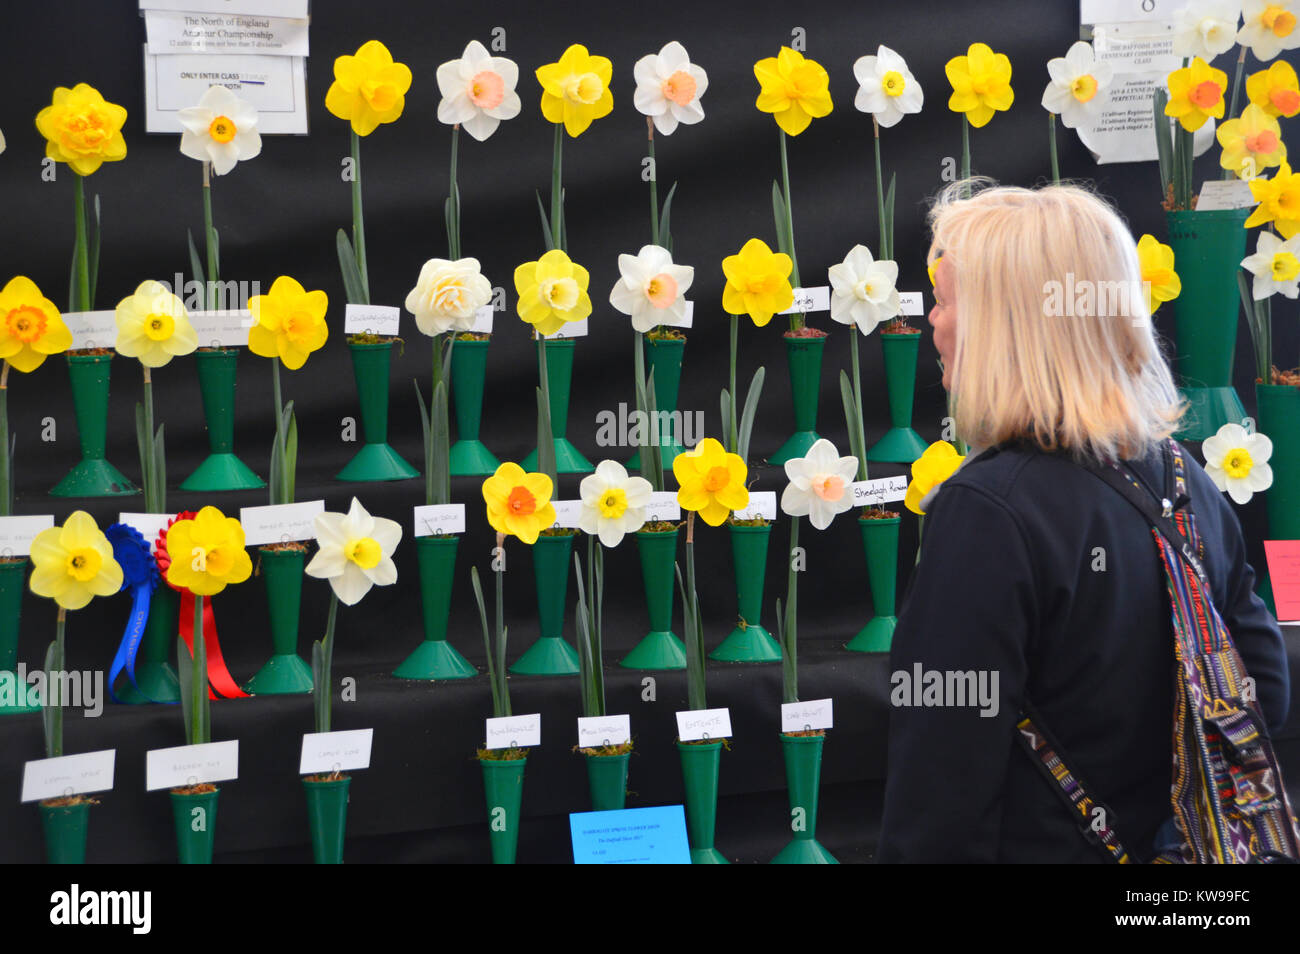 Lone Woman Looking at a Display of Single Stem Daffodils in Vases on Display at the Harrogate Spring Show. Yorkshire, England, UK. Stock Photo